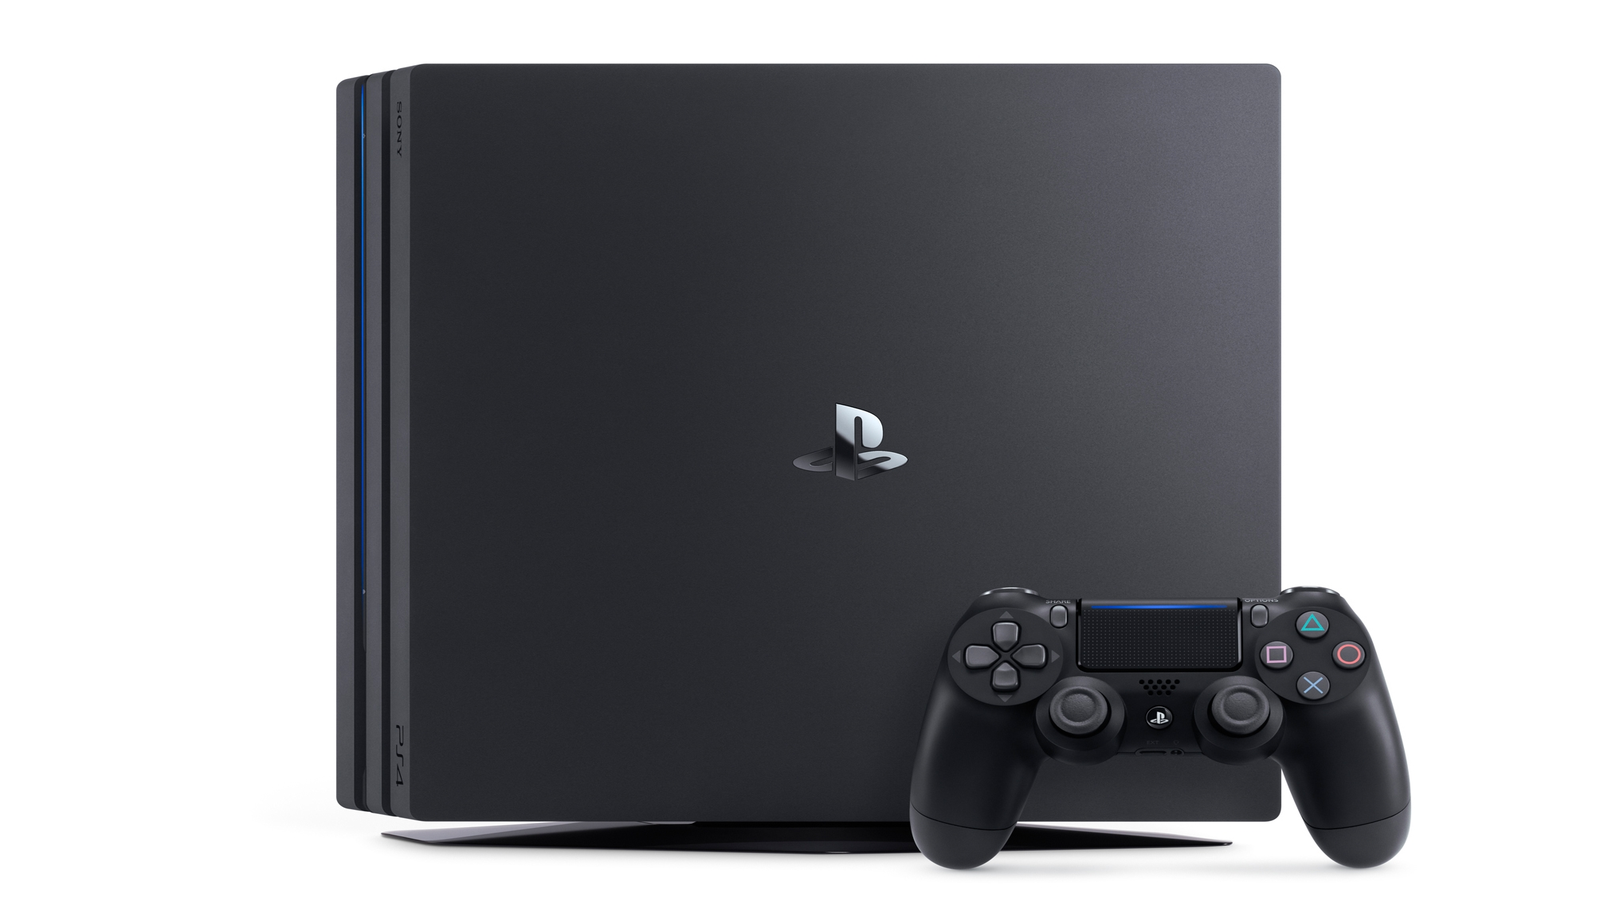 PS4 Pro review – Is Sony's 4K/HDR console worth the dosh?